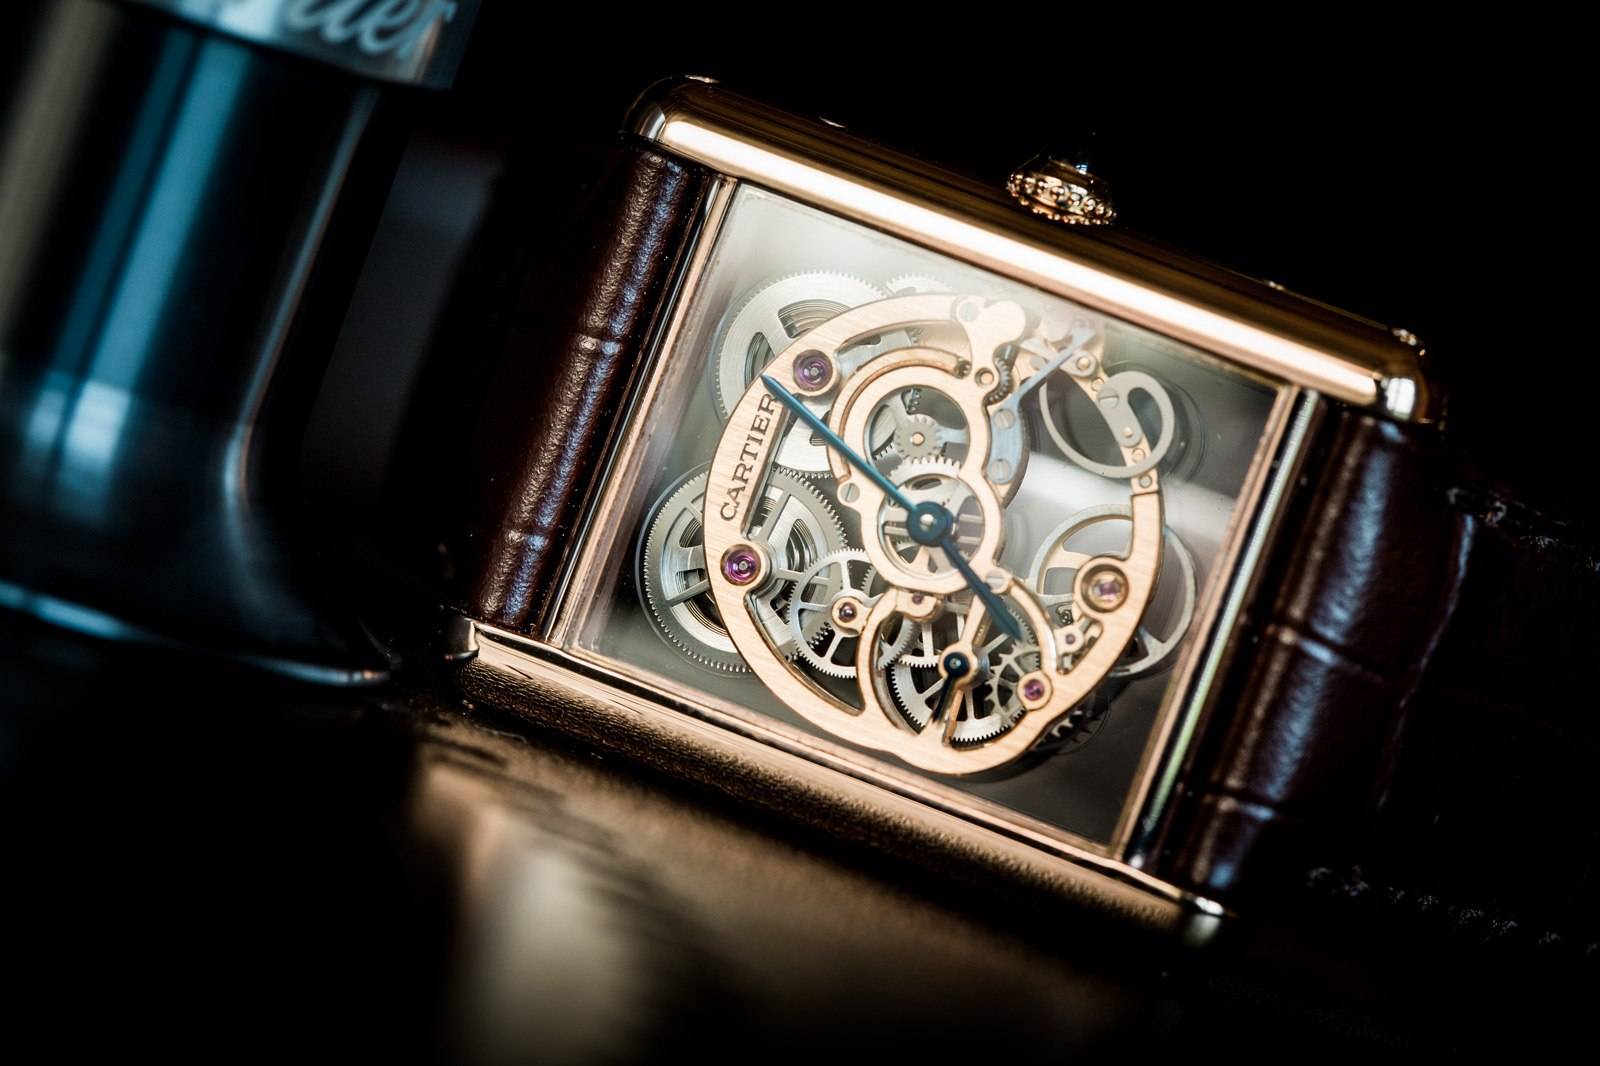 Introducing The New Cartier Tank Louis Cartier Skeleton Sapphire In Rose Gold